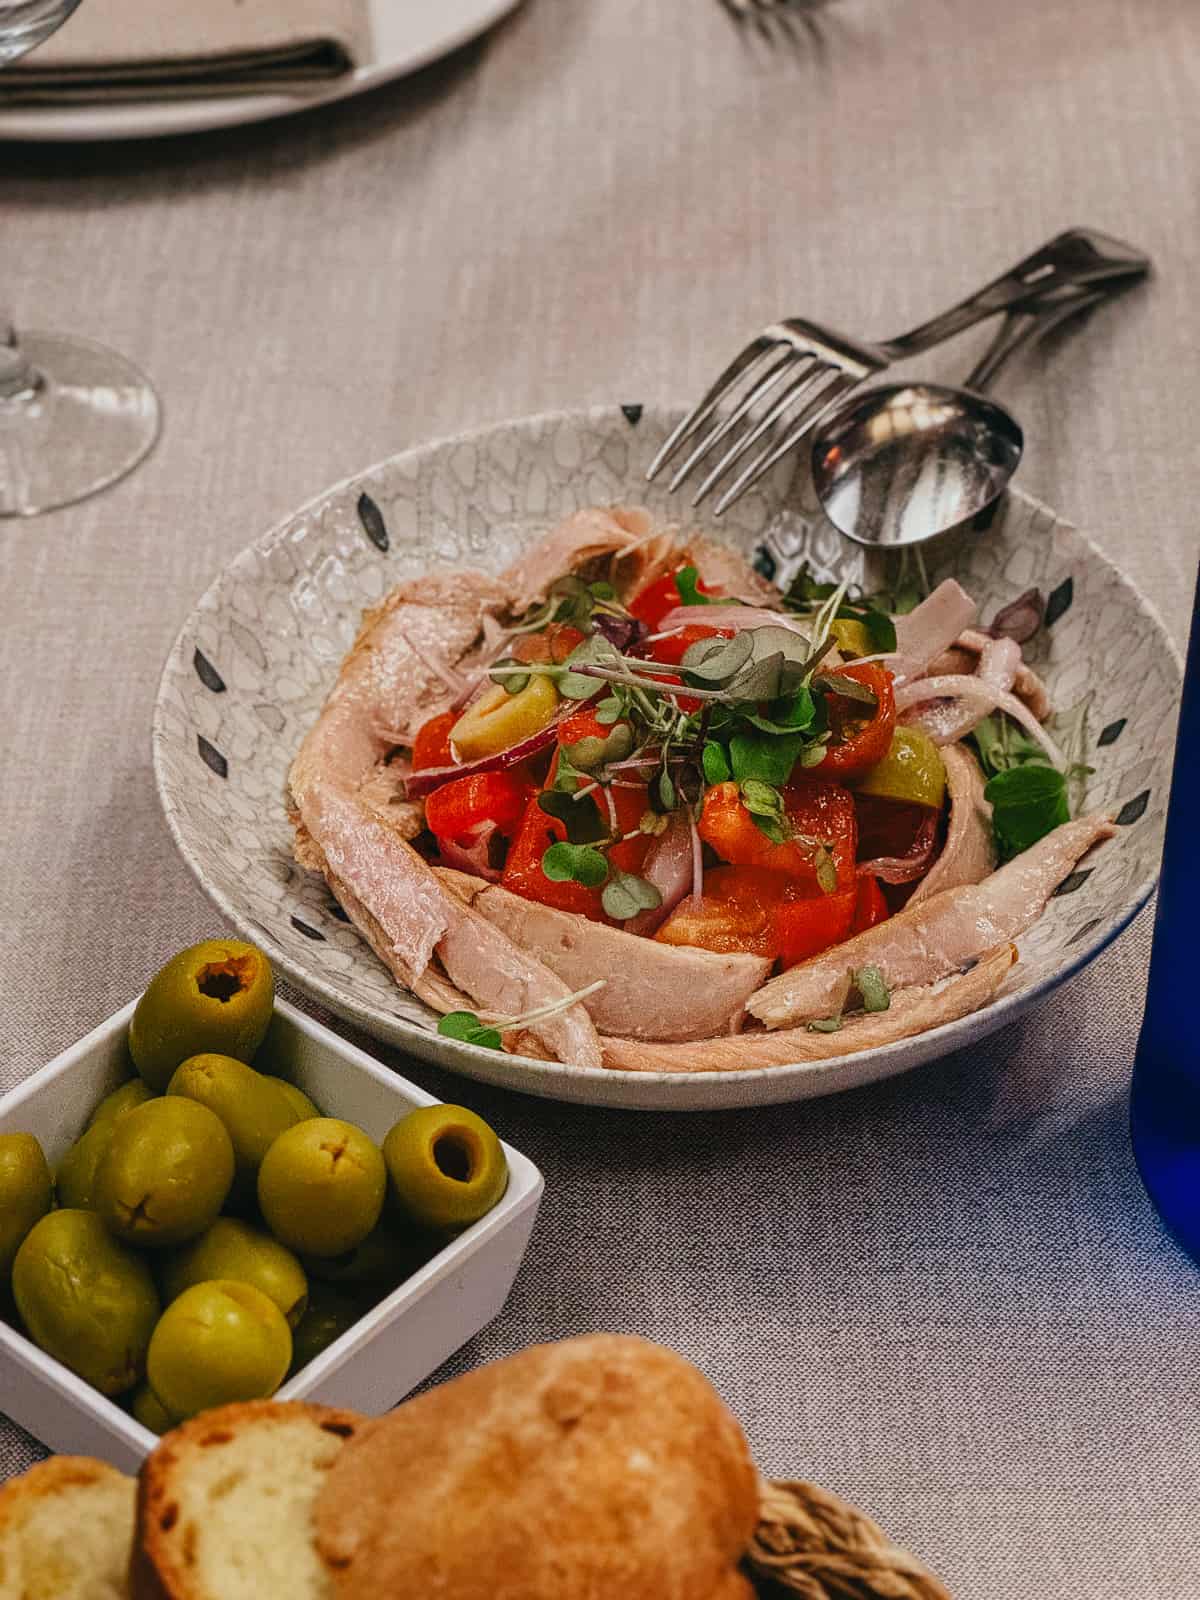 A fresh tuna salad with vibrant tomatoes, green olives, and microgreens served in a glass bowl on a textured tablecloth, accompanied by bread and a bowl of olives, ready for dining